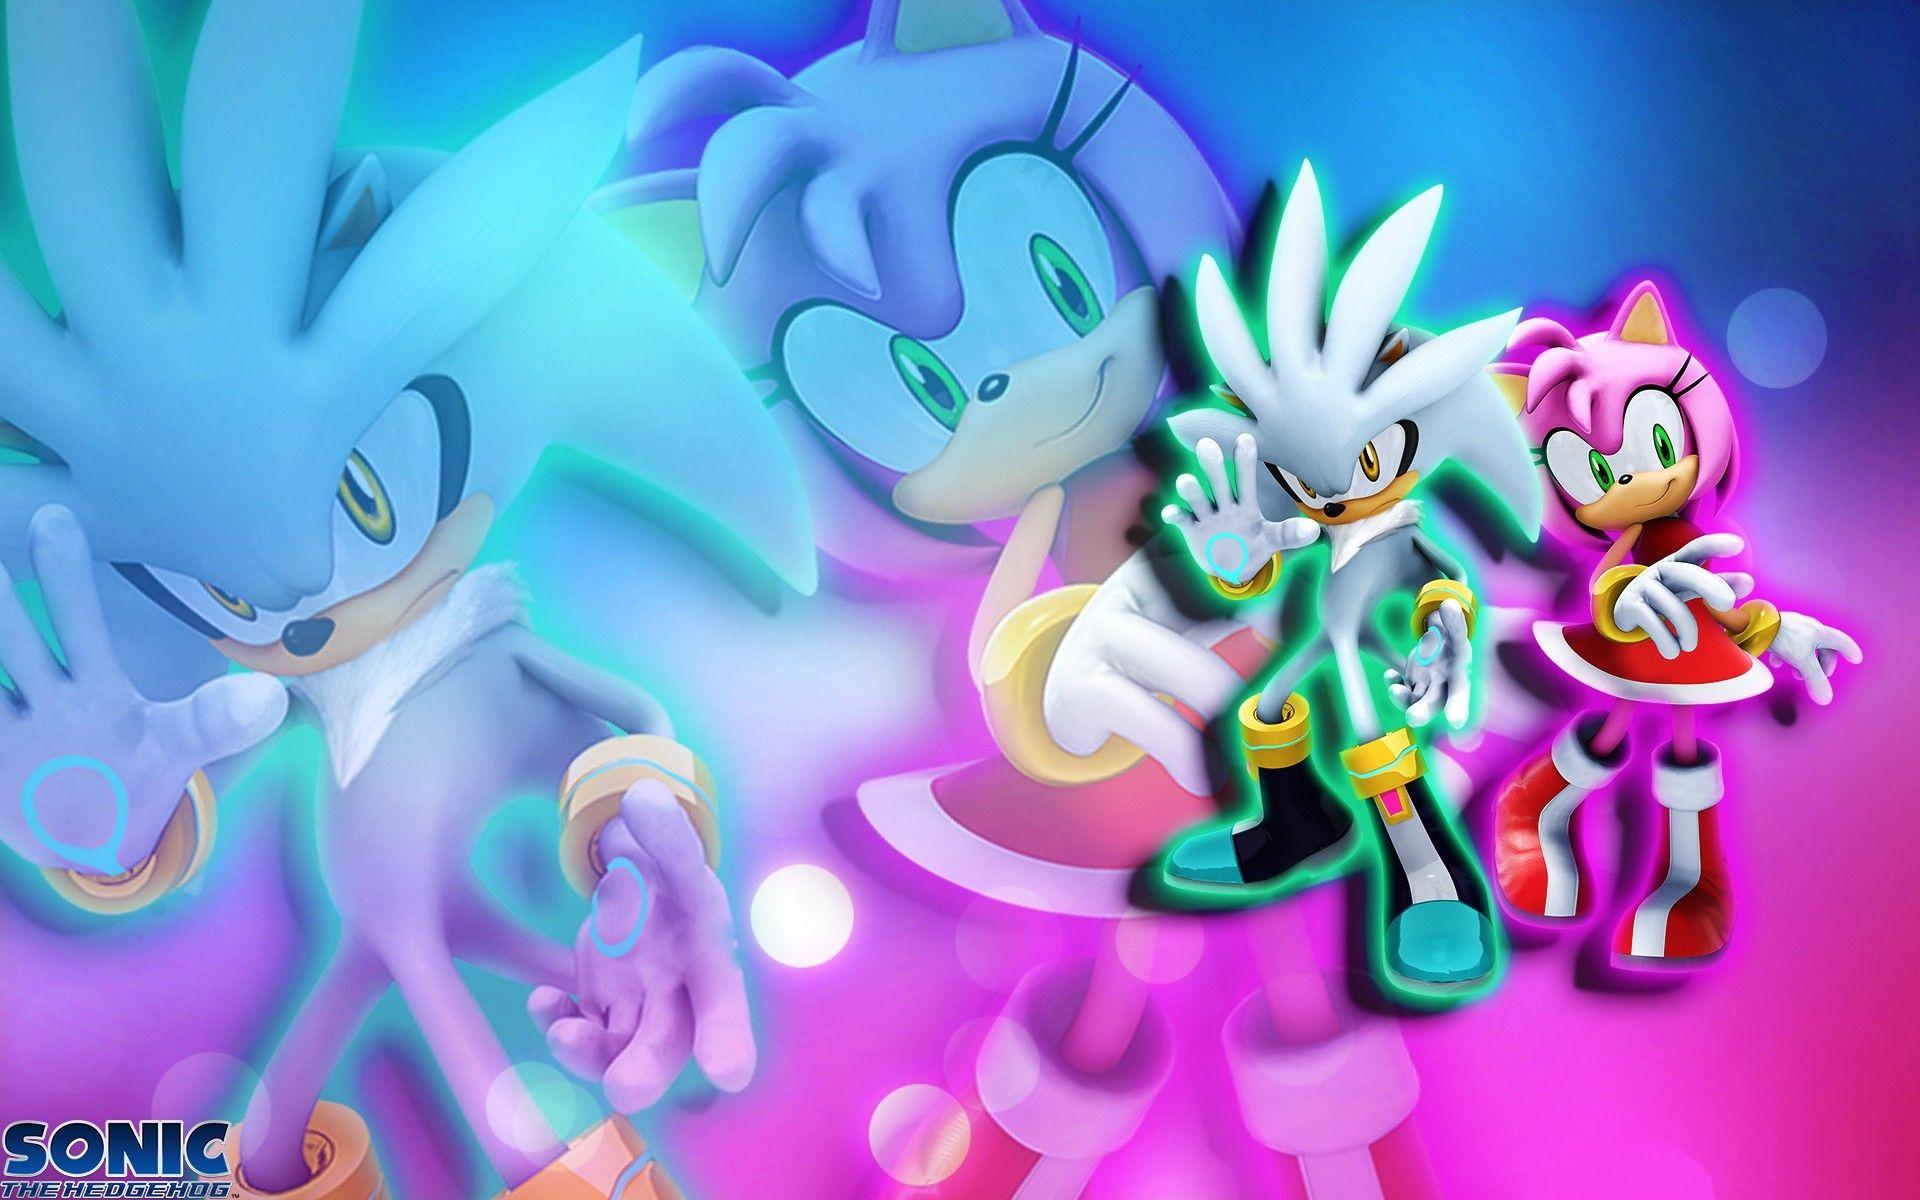 Discover 70+ silver the hedgehog wallpaper best - in.cdgdbentre